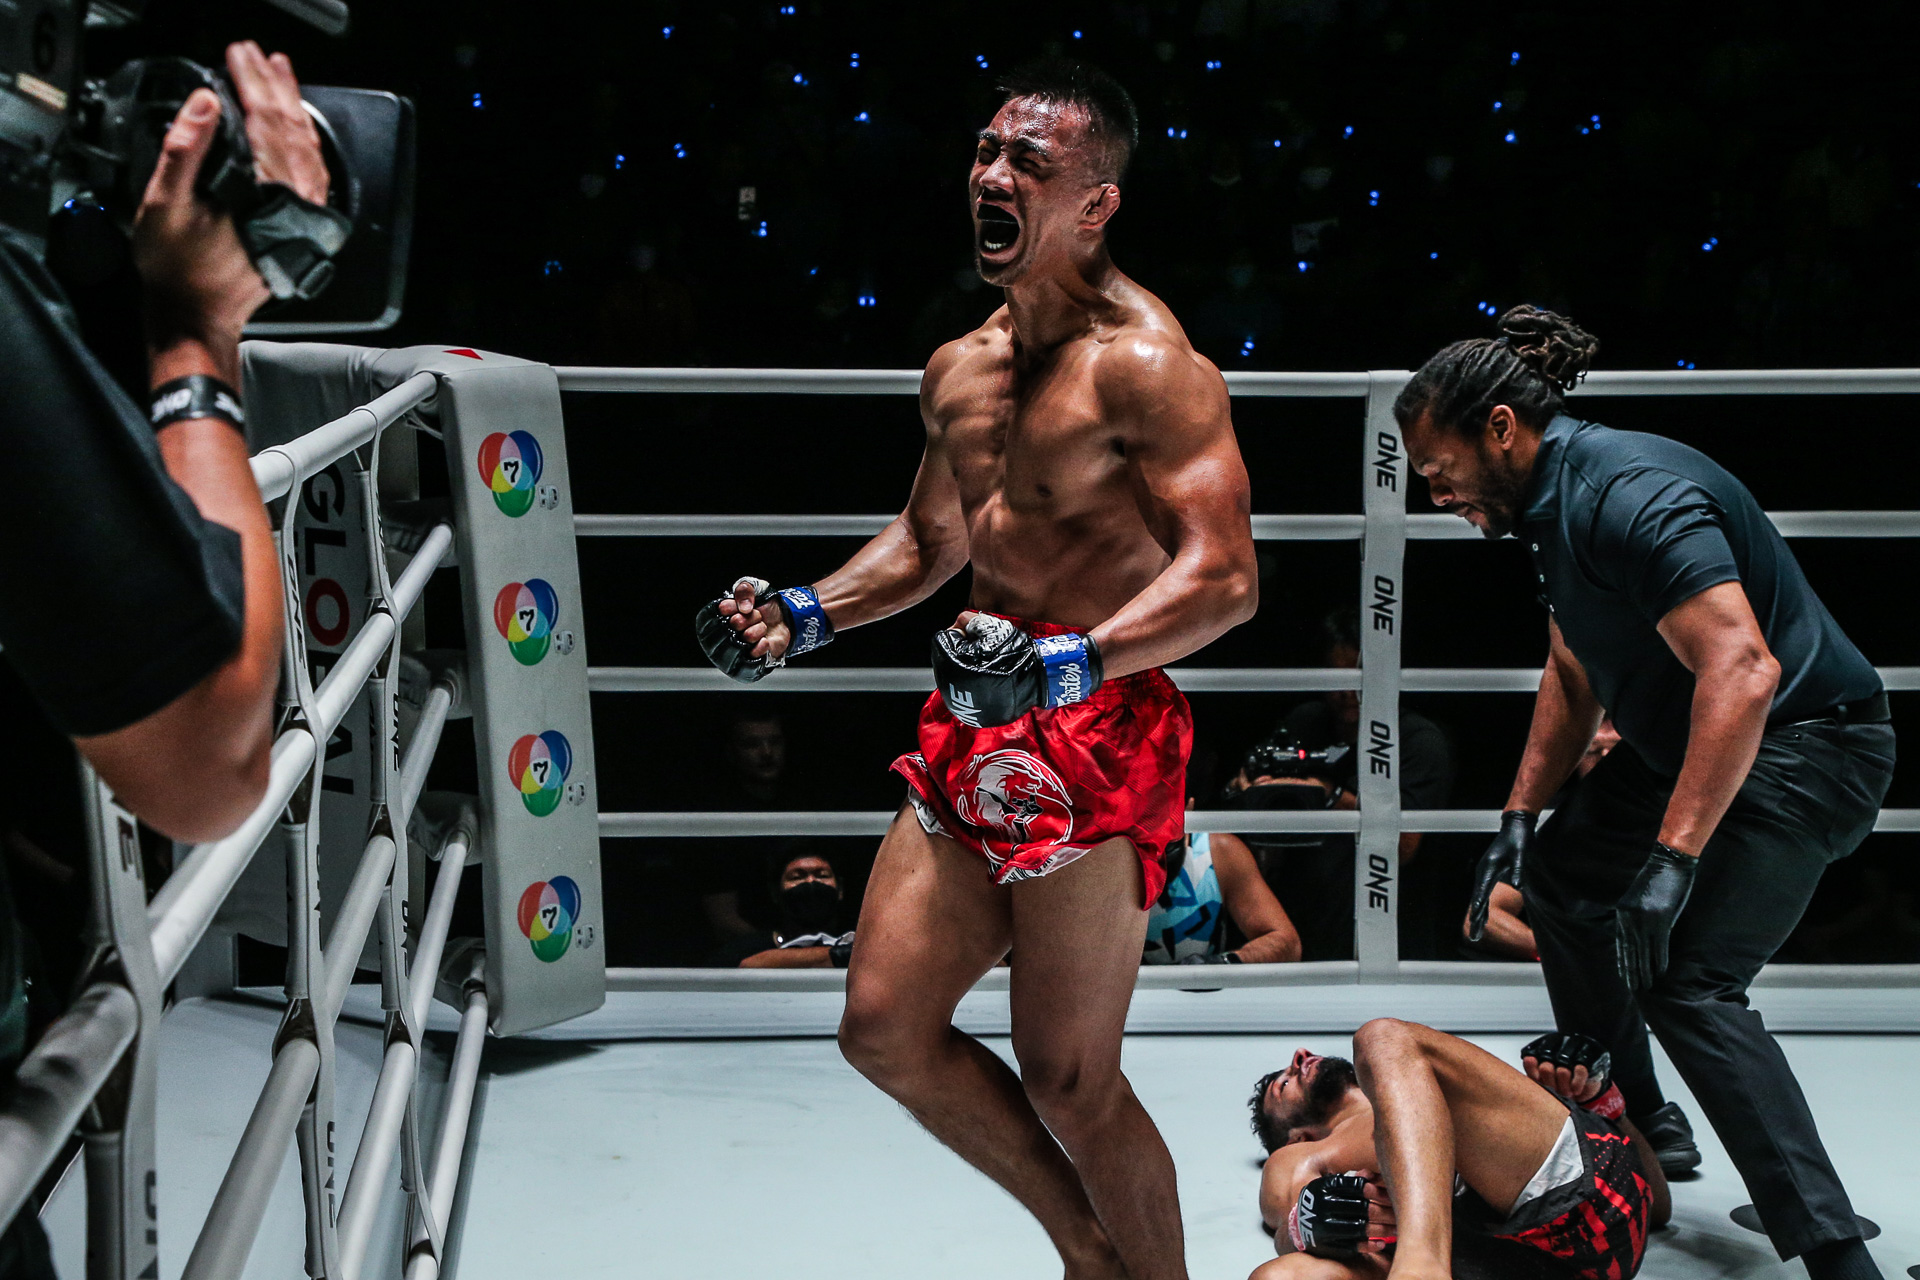 ONE-Friday-Fights-25-Carlos-Alvarez-def-Sadegh-Ghasemi-2 Carlos Alvarez guns permanent roster spot with ONE Friday Fights 43 win Mixed Martial Arts News ONE Championship  - philippine sports news